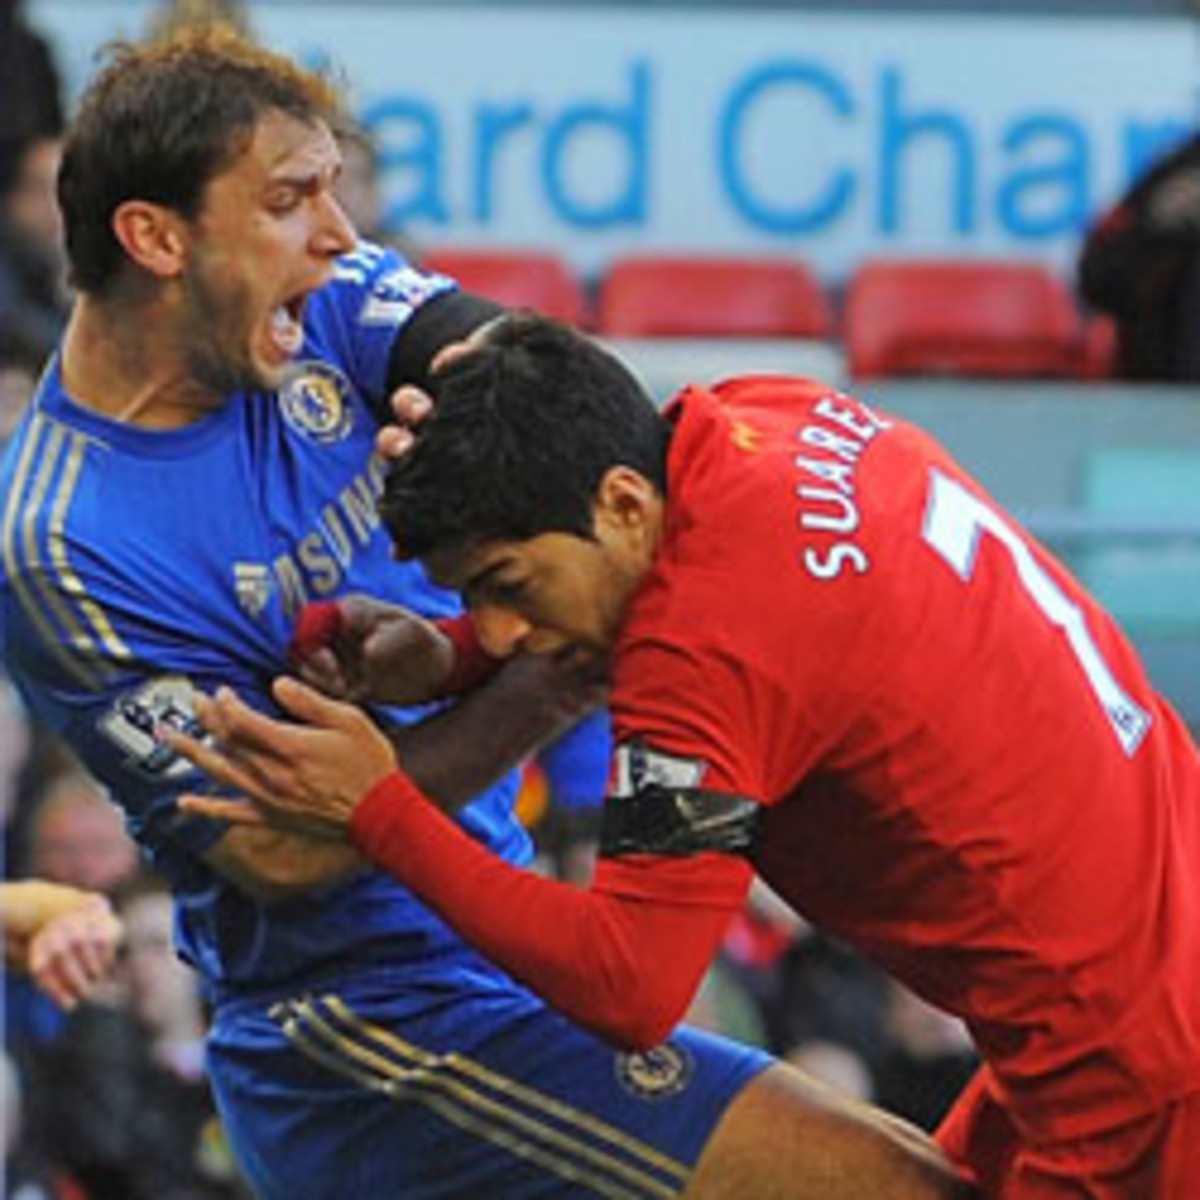 Liverpool's Luis Suarez has been suspended 10 games for biting an opponent. (Andrew Yates/AFP)